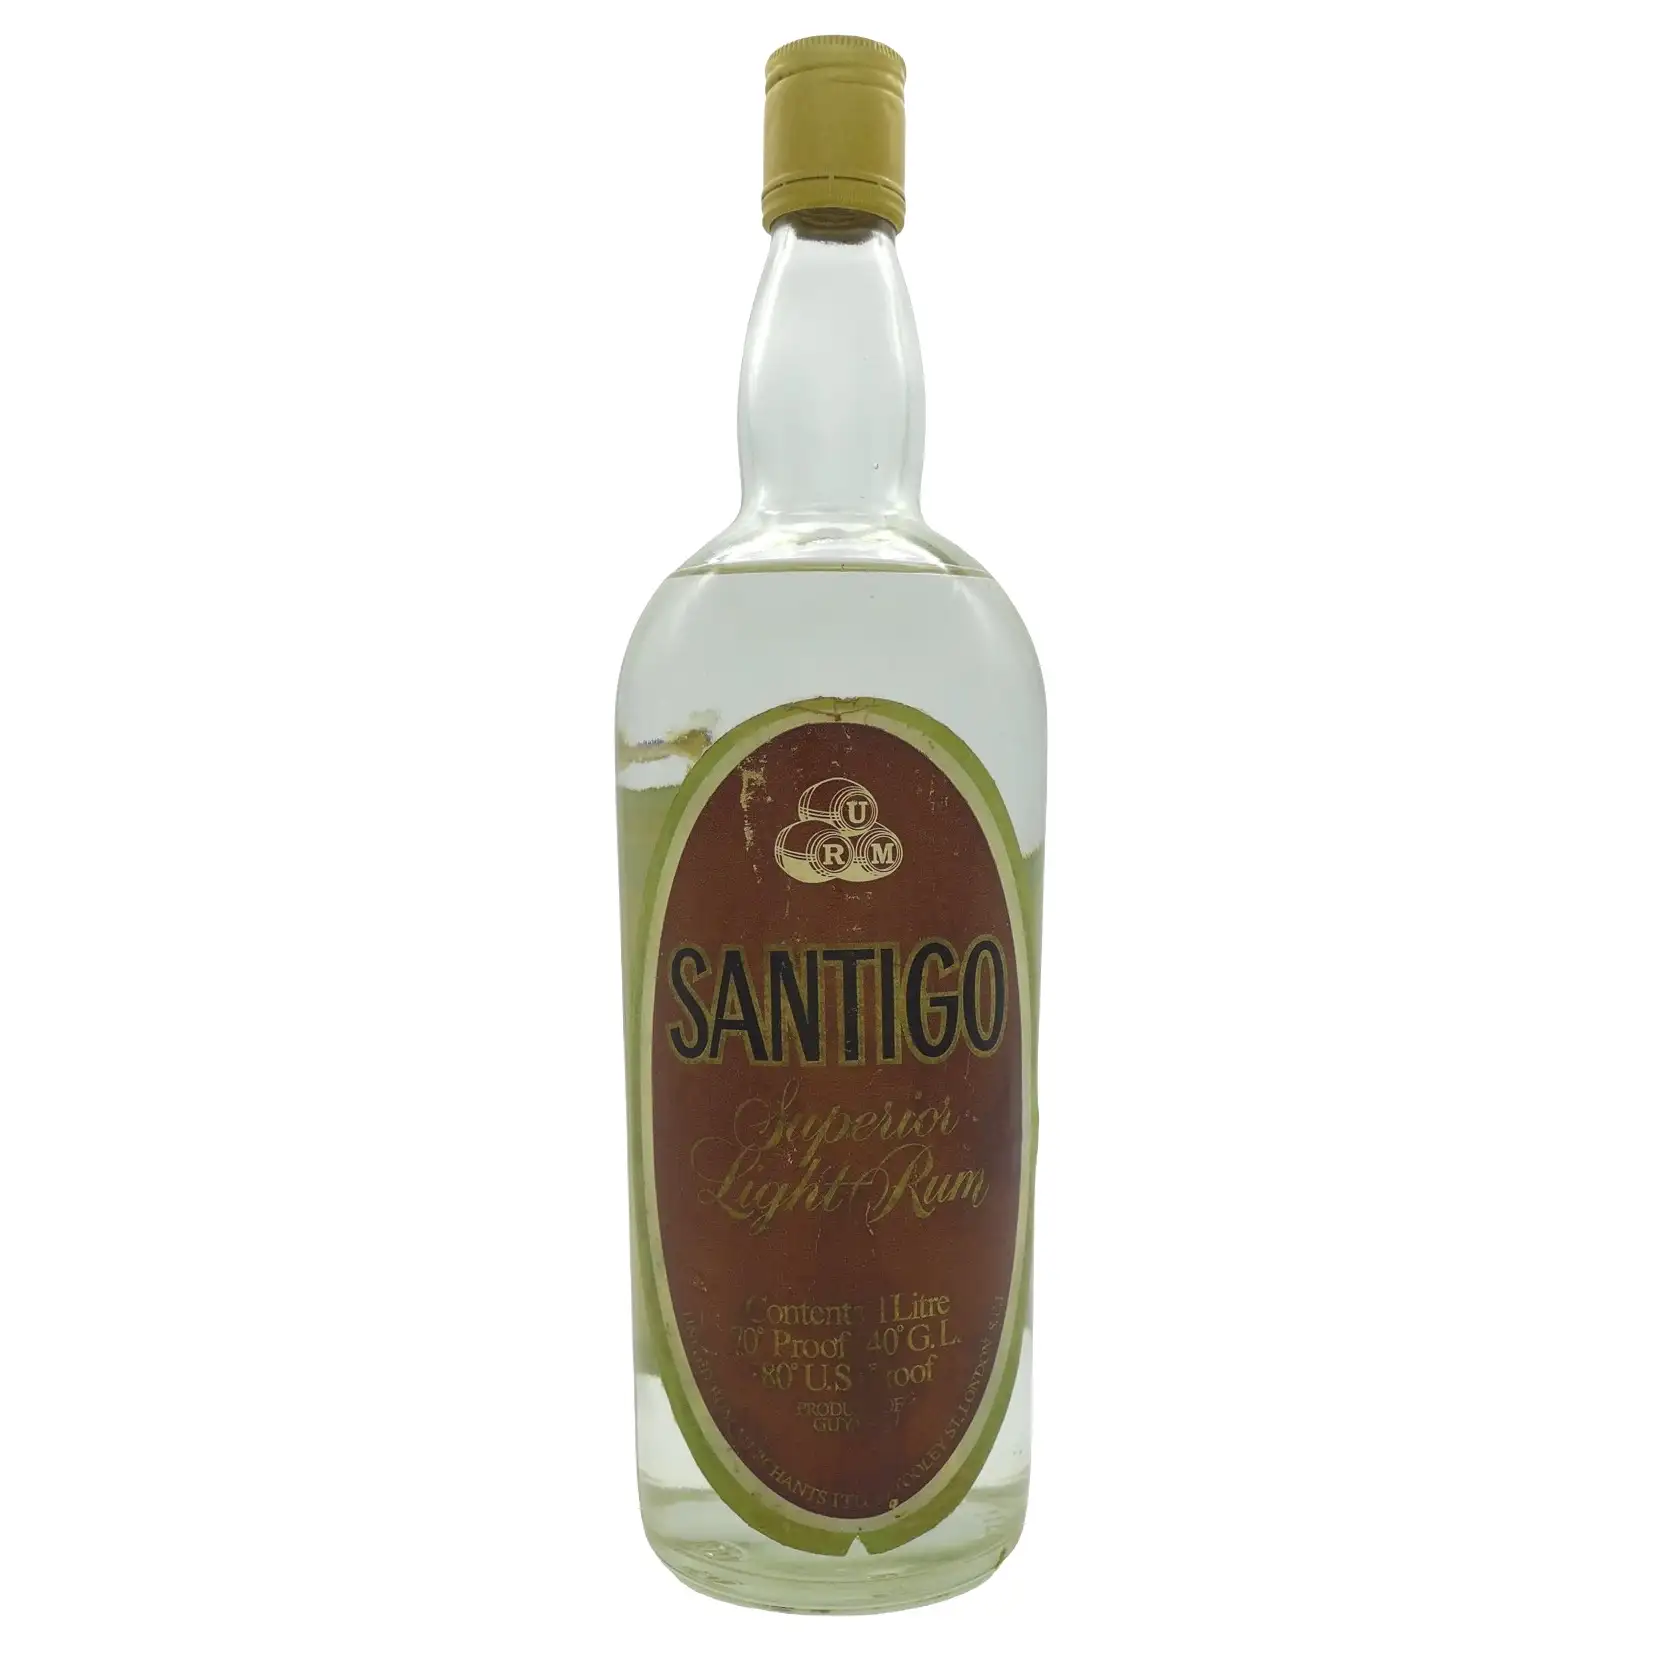 Image of the front of the bottle of the rum Santigo